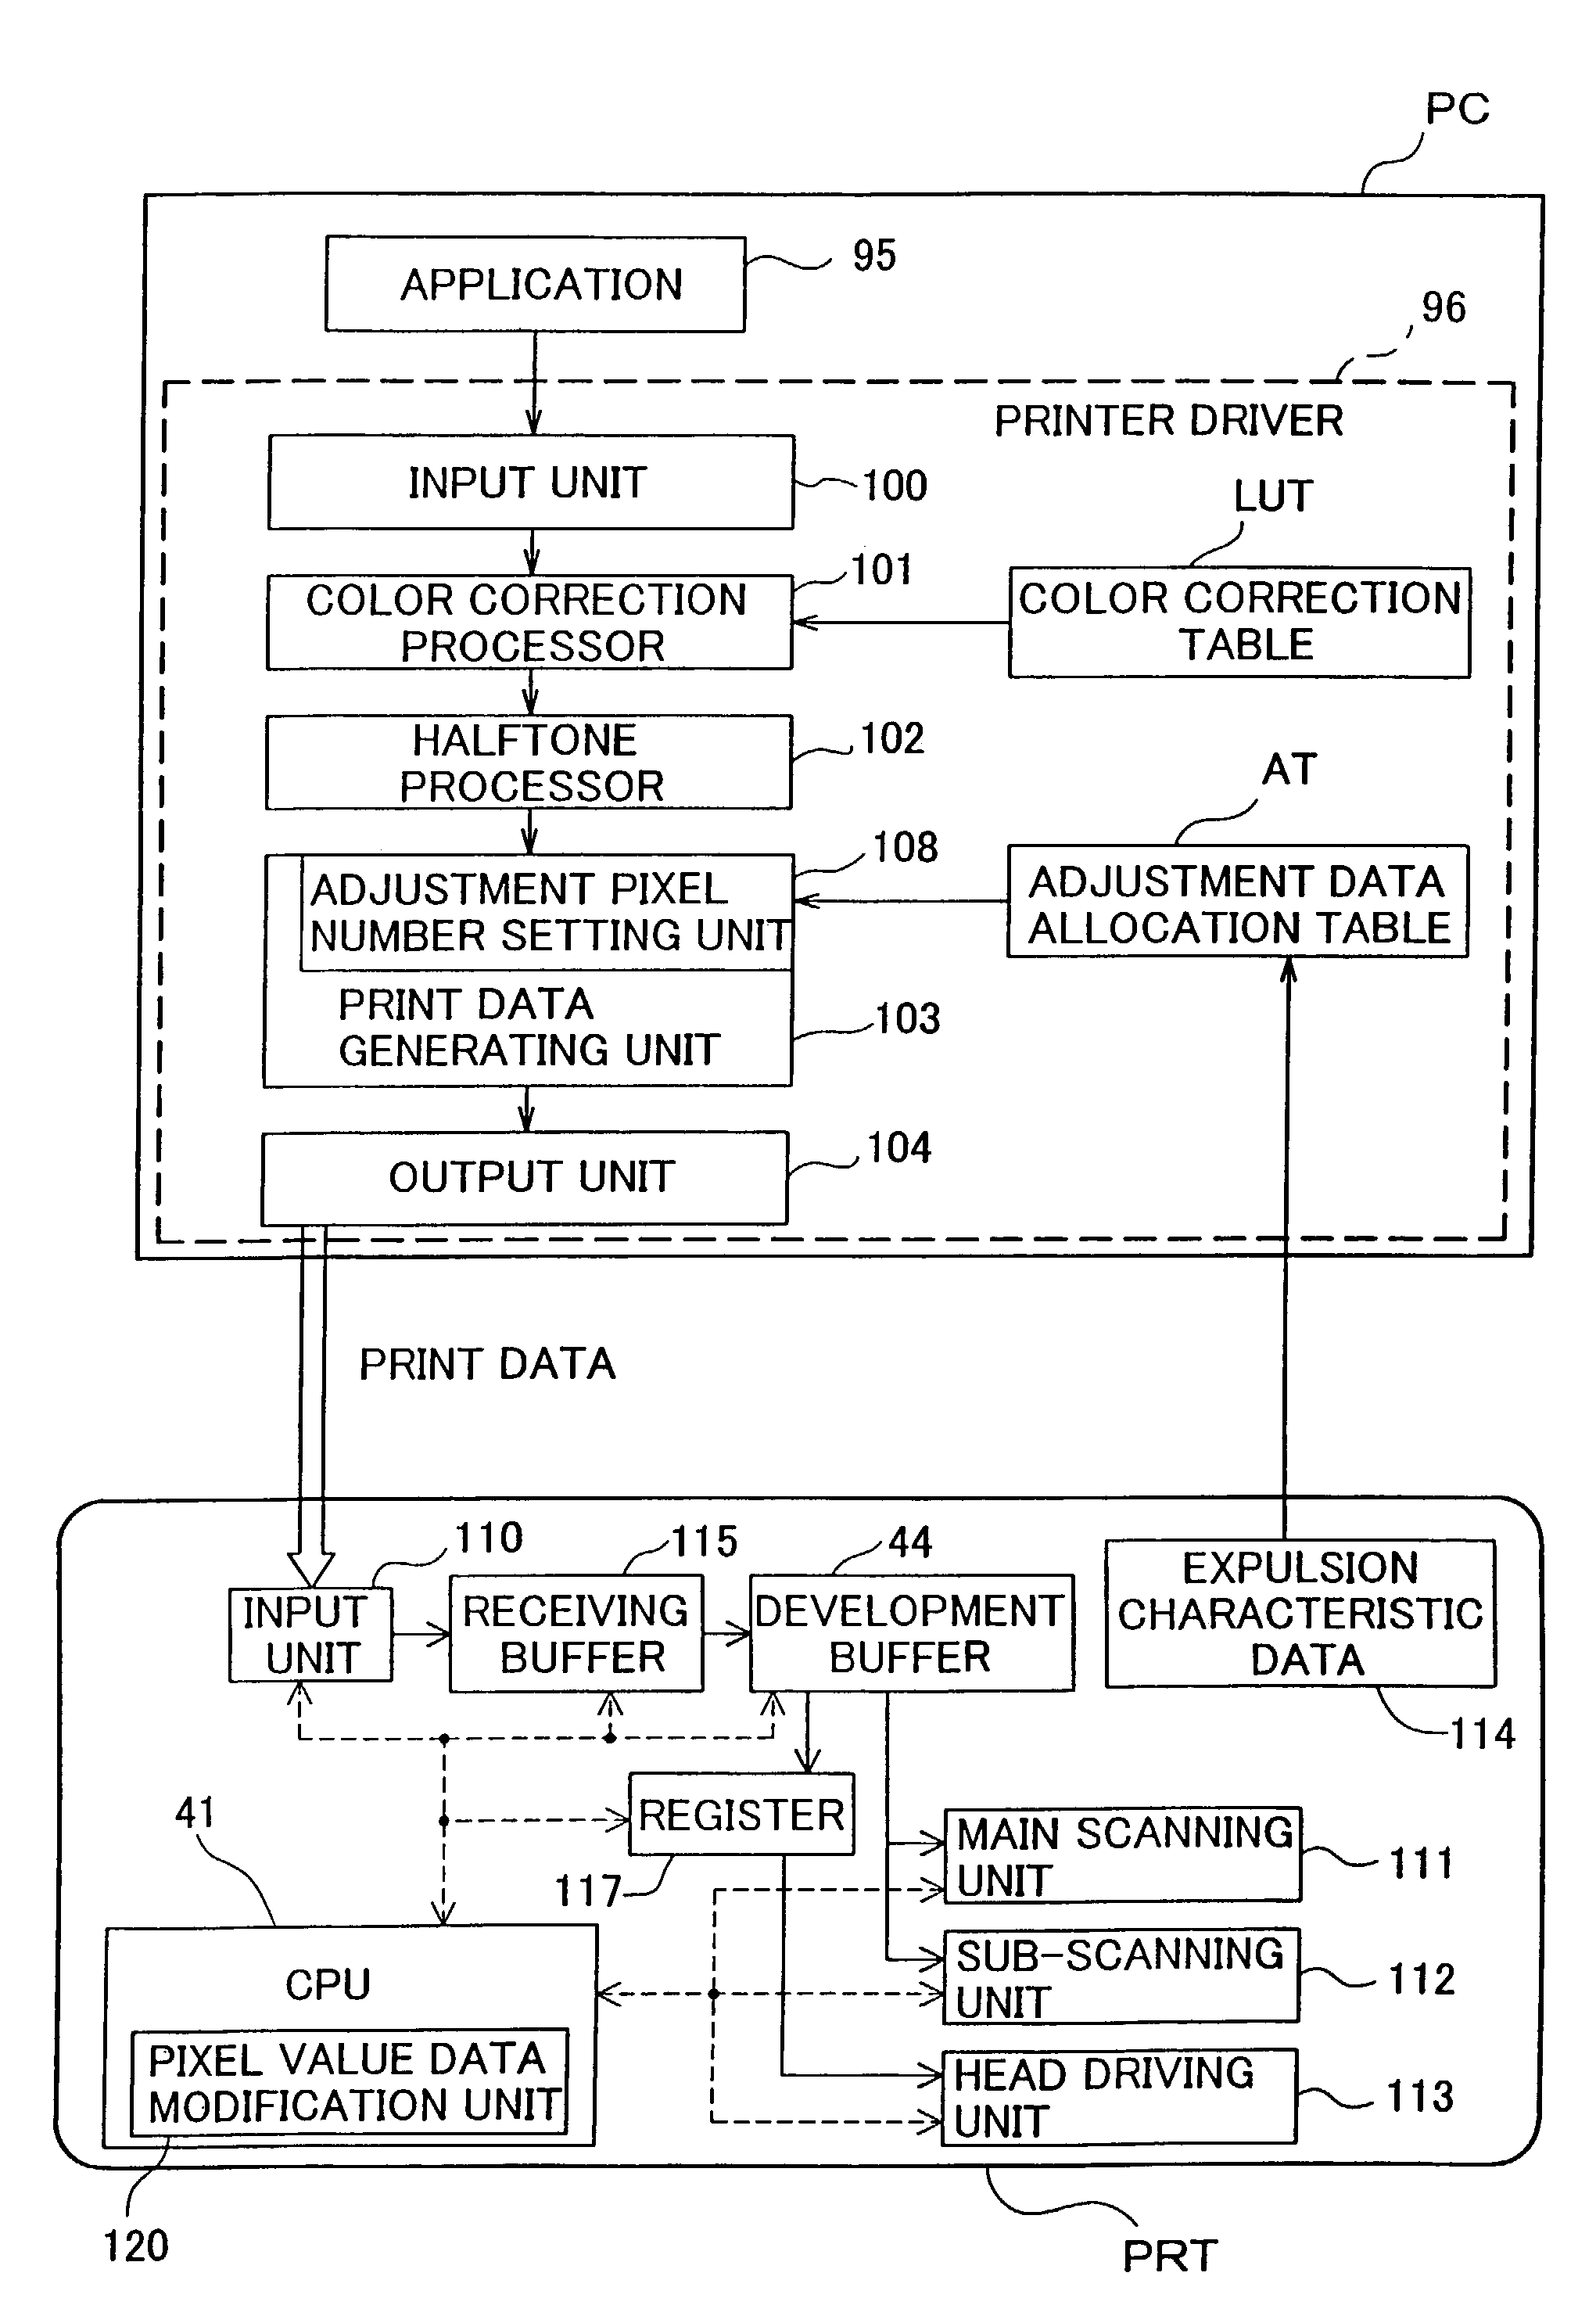 Dot formation position misalignment adjustment performed using pixel-level information indicating dot non-formation